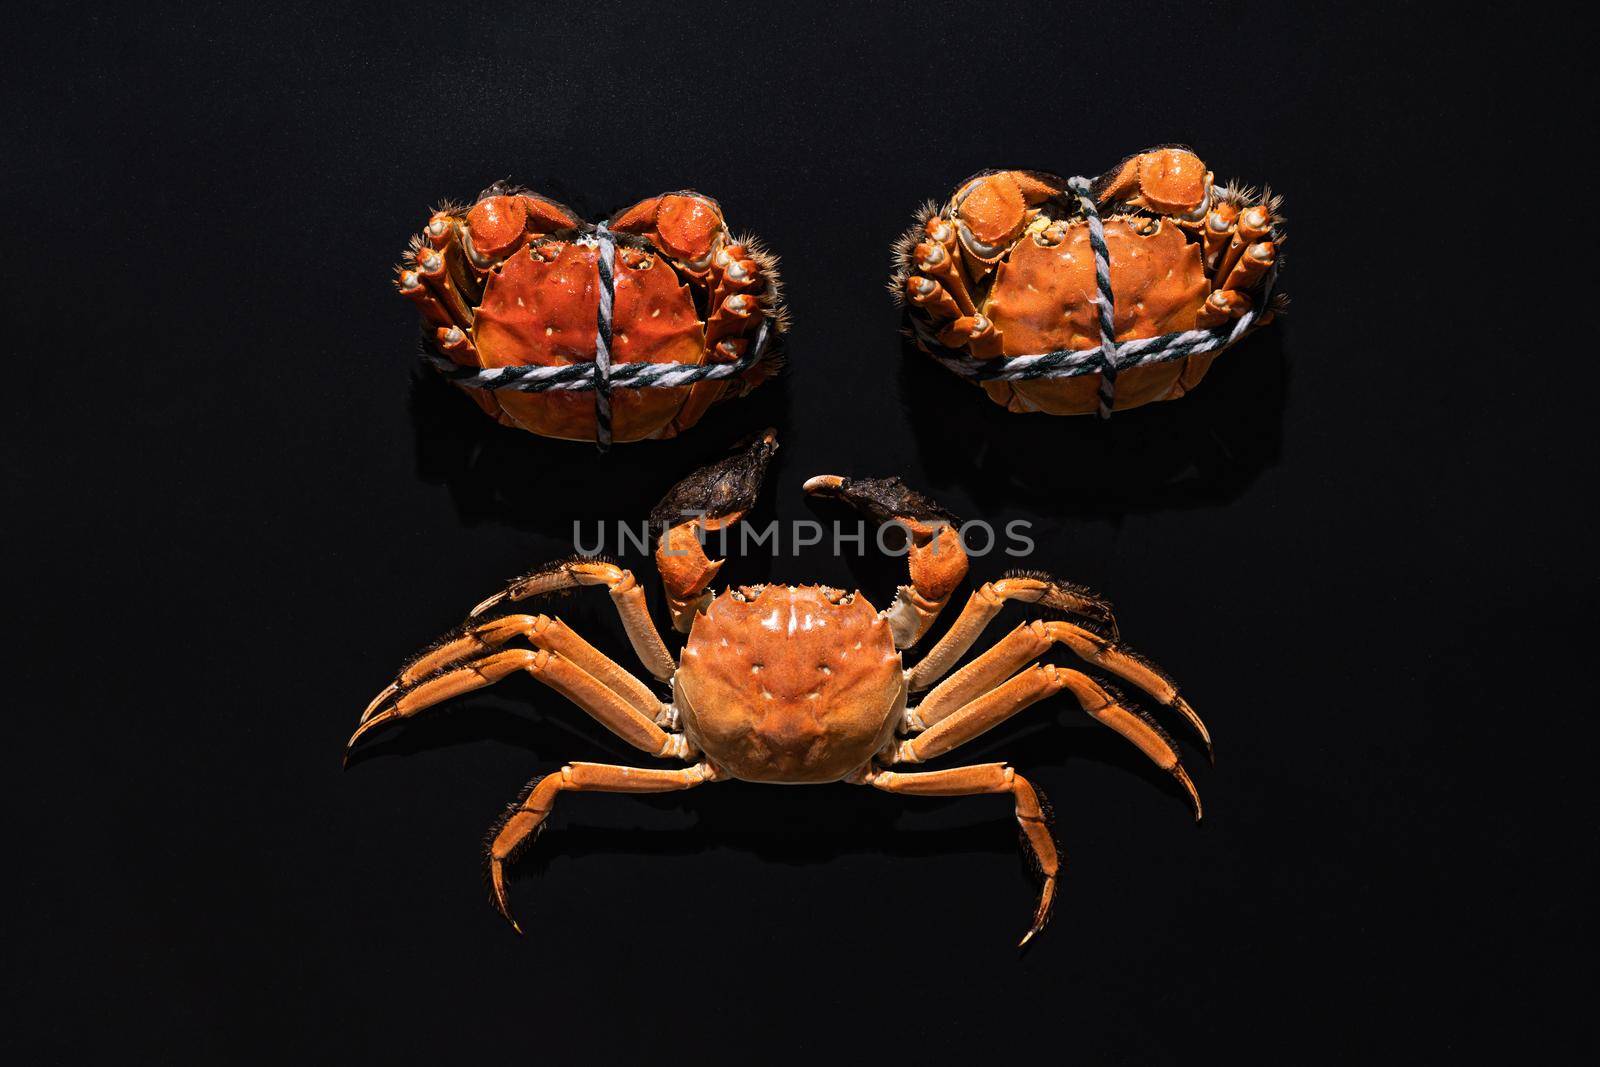 boiled Shanghai hairy crab or Chinese mitten crab (Eriocheir sinensis) with Chili and herb on black background by psodaz